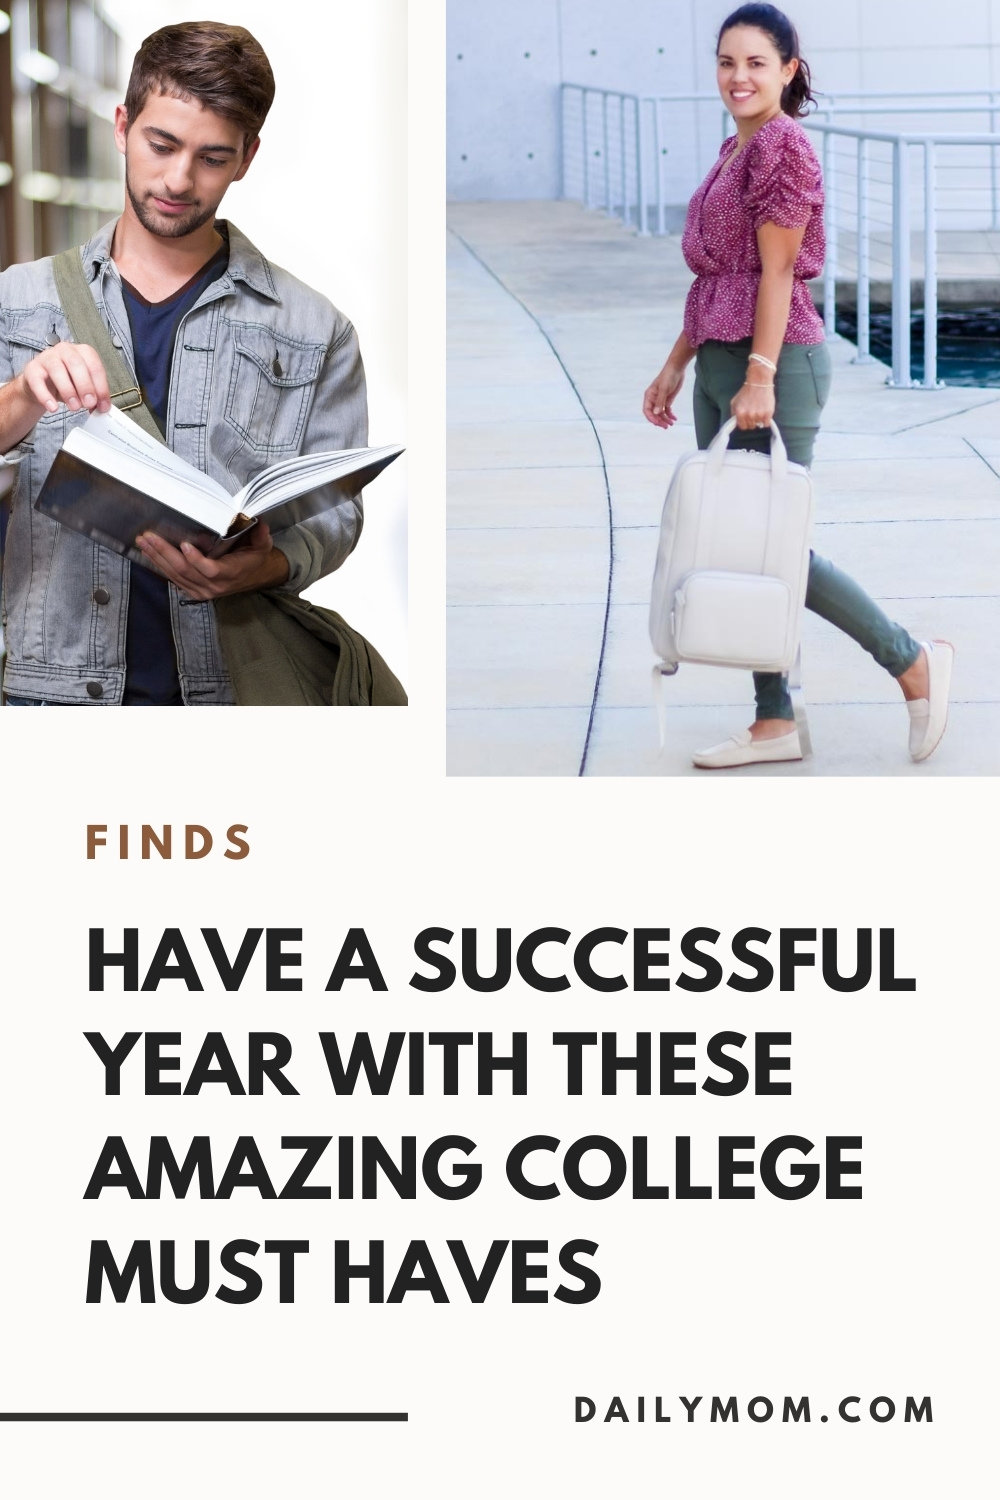 23 College Must Haves For A Successful Year